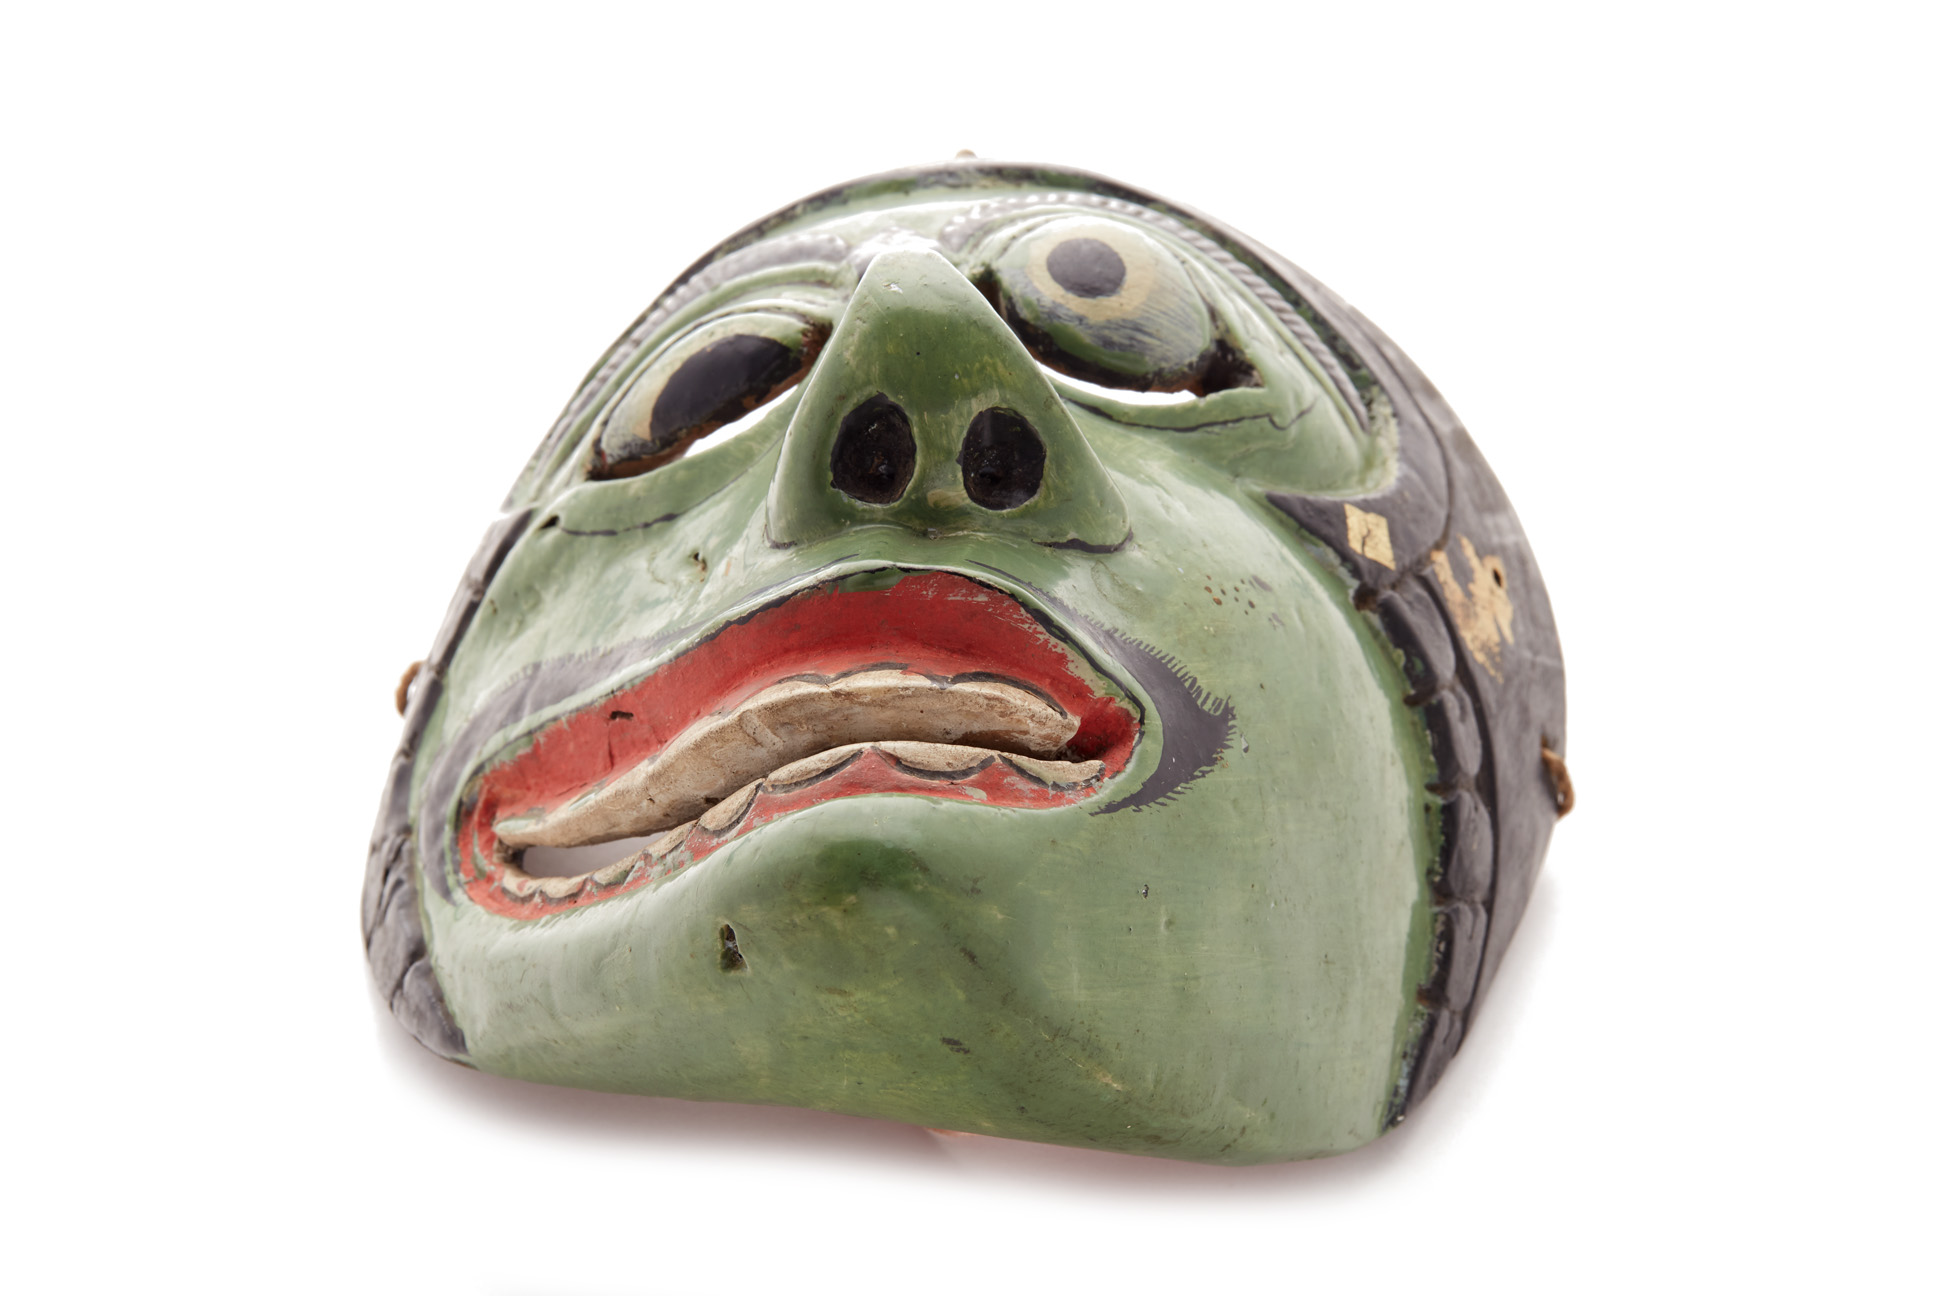 AN INDONESIAN TOPENG DANCE MASK OF A CLOWN CHARACTER - Image 4 of 6